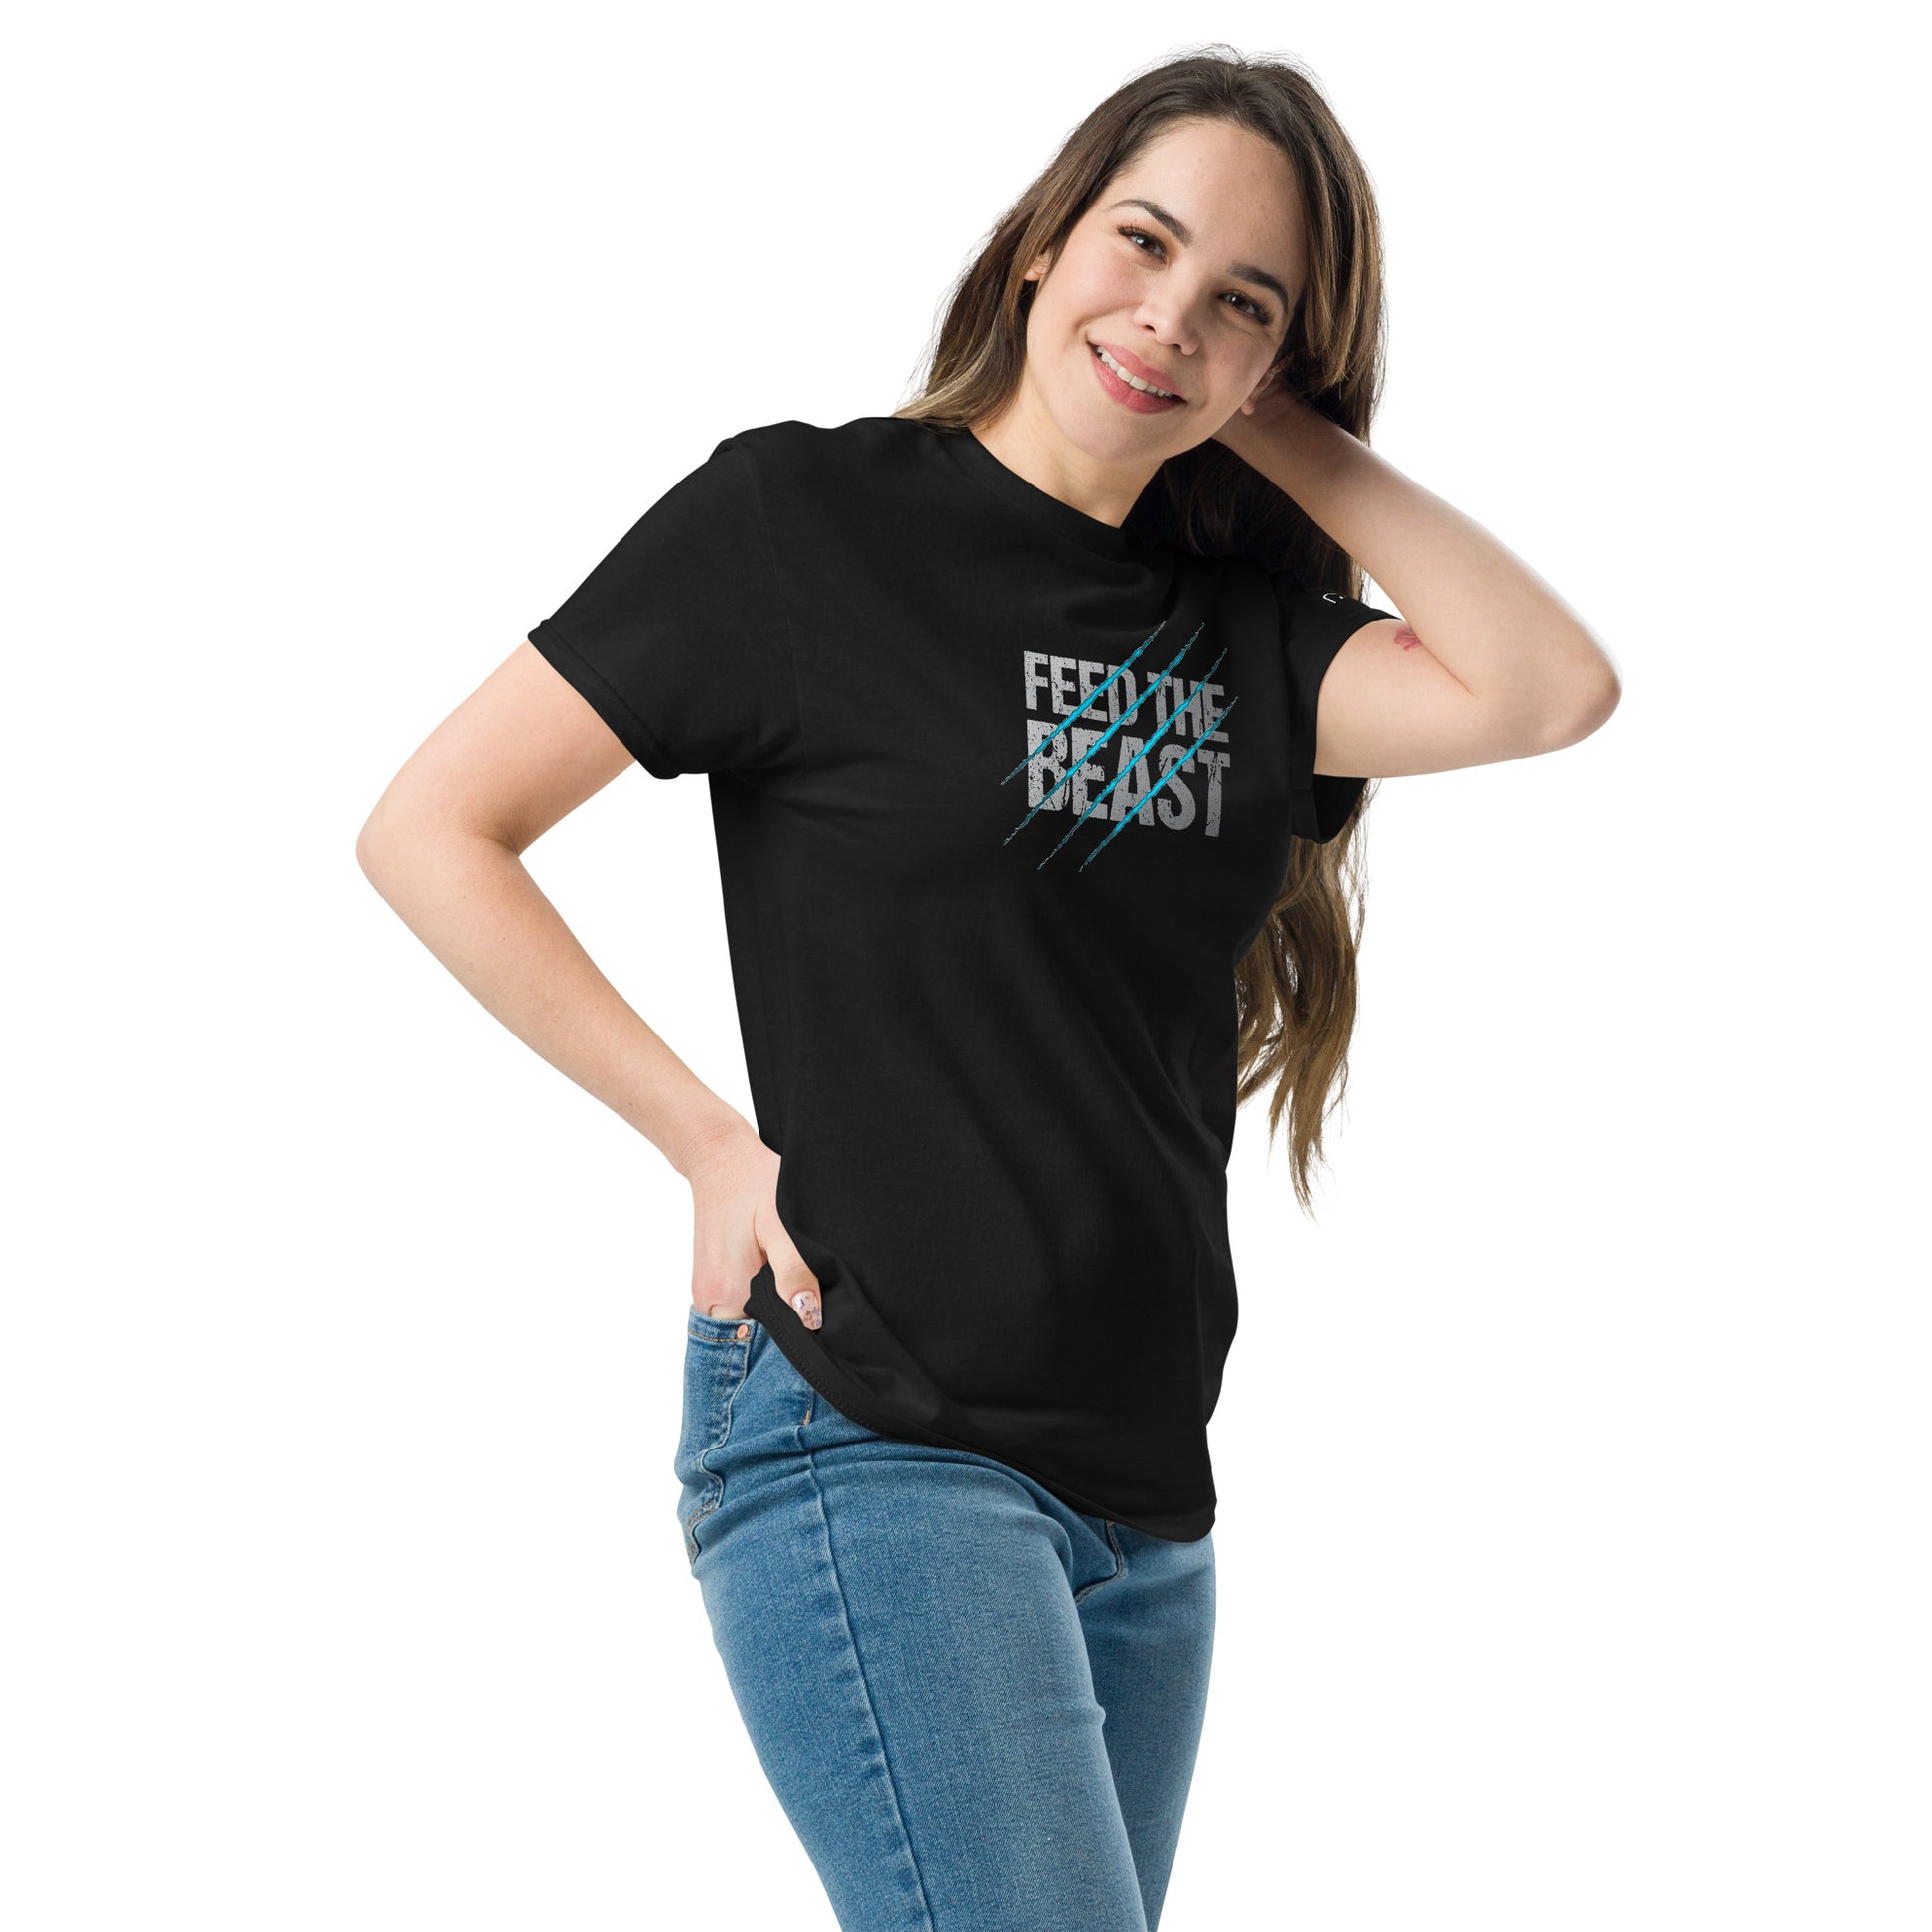 A young woman smiling, wearing a black t-shirt with a vibrant graphic that reads 'FEED THE BEAST' in large, distressed white and blue text with diagonal blue scratch marks, paired with blue jeans.